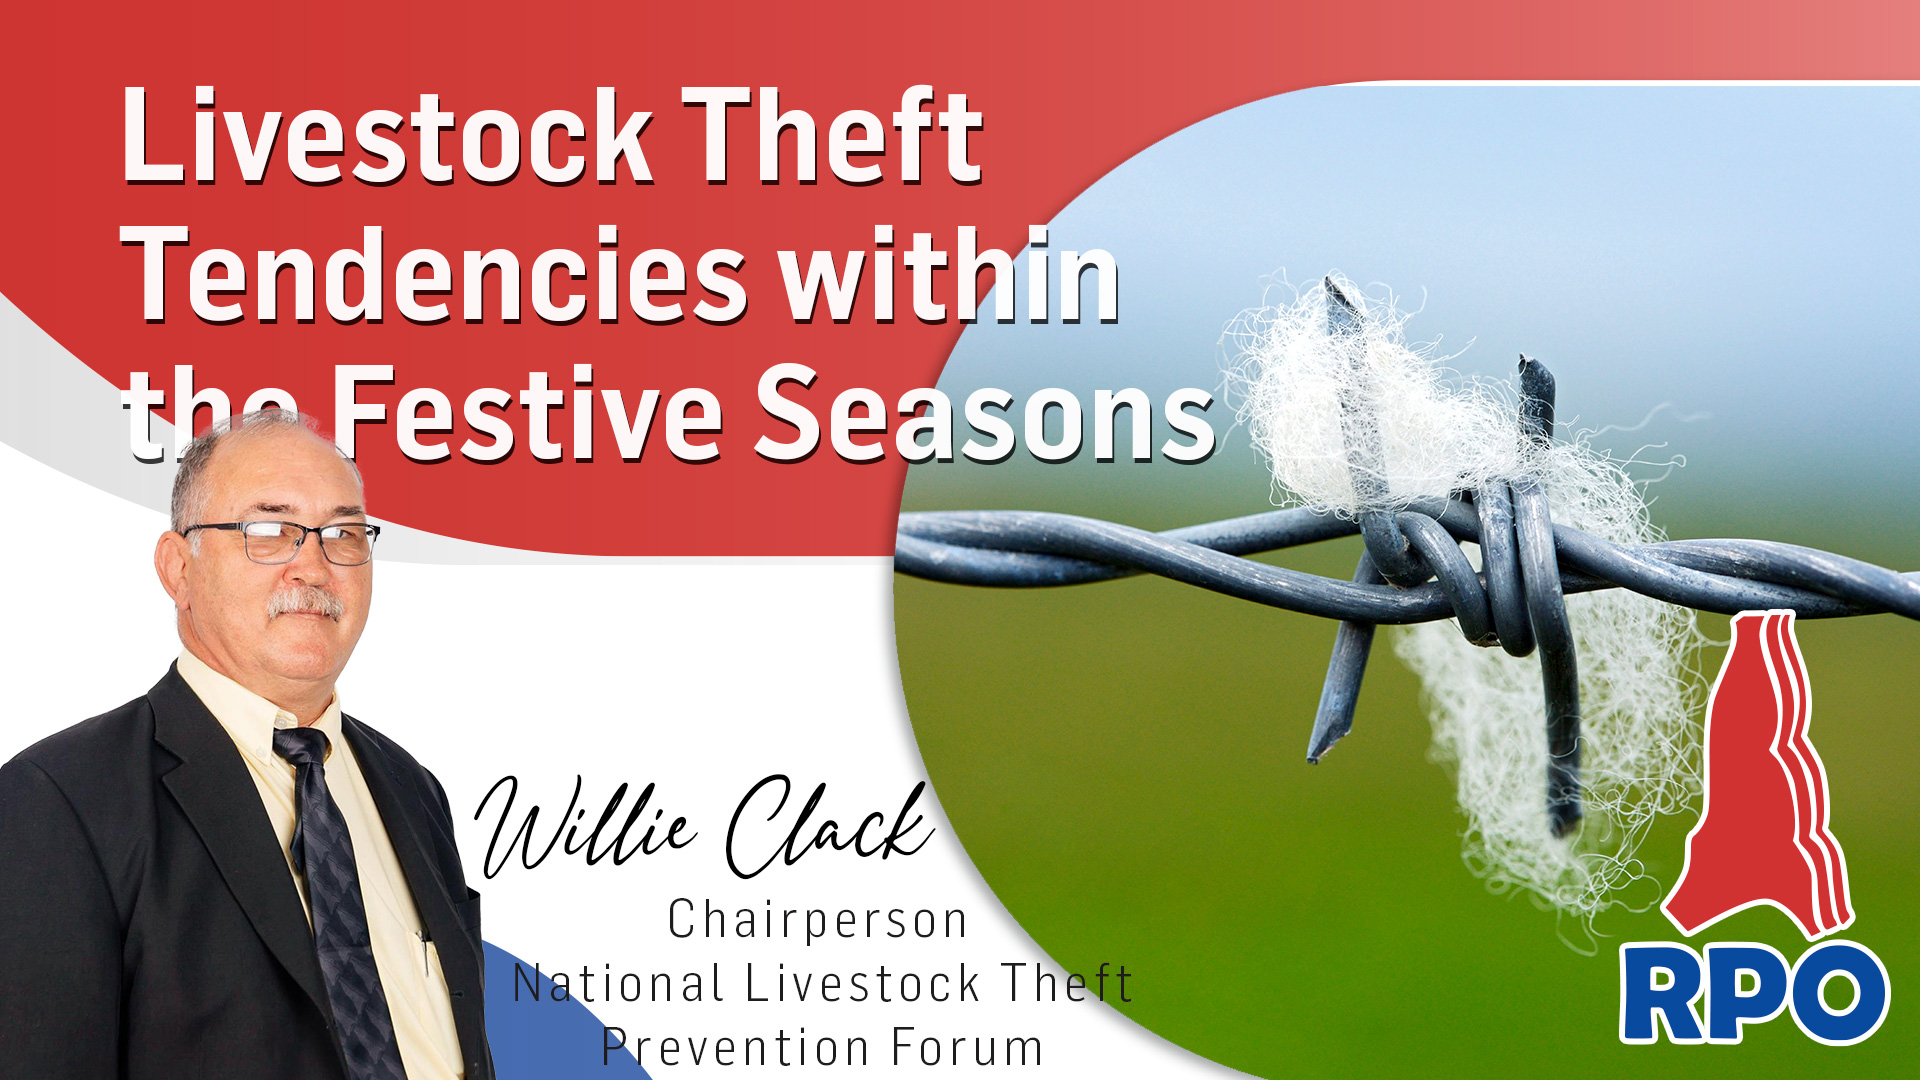 Livestock Theft Tendencies within the Festive Seasons - Willie Clack